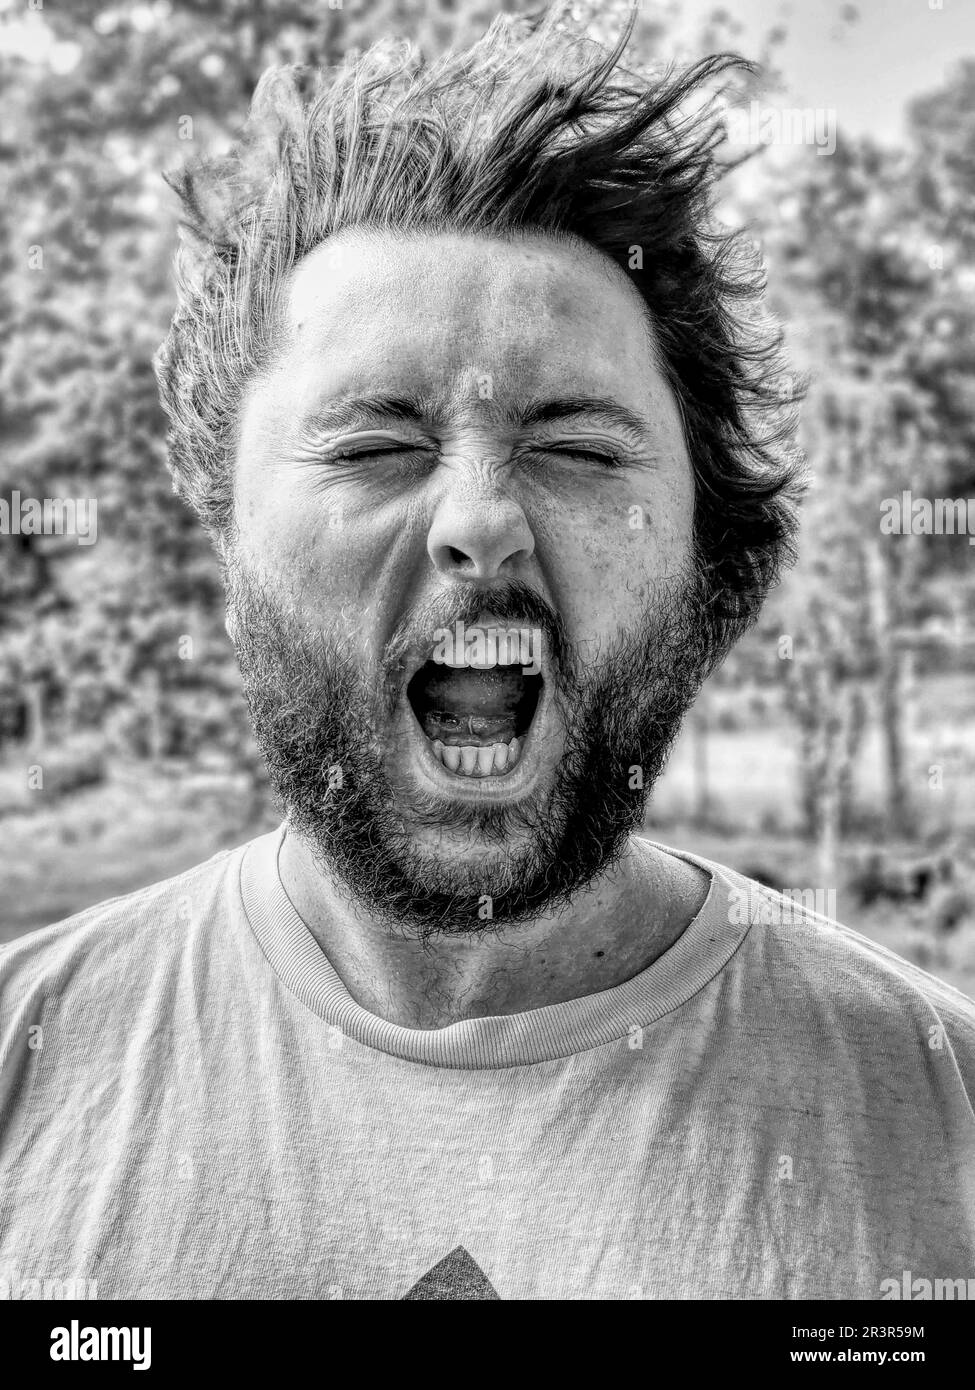 Black & White Photo of a man's face getting hit by wind, his eyes closed and mouth open Stock Photo